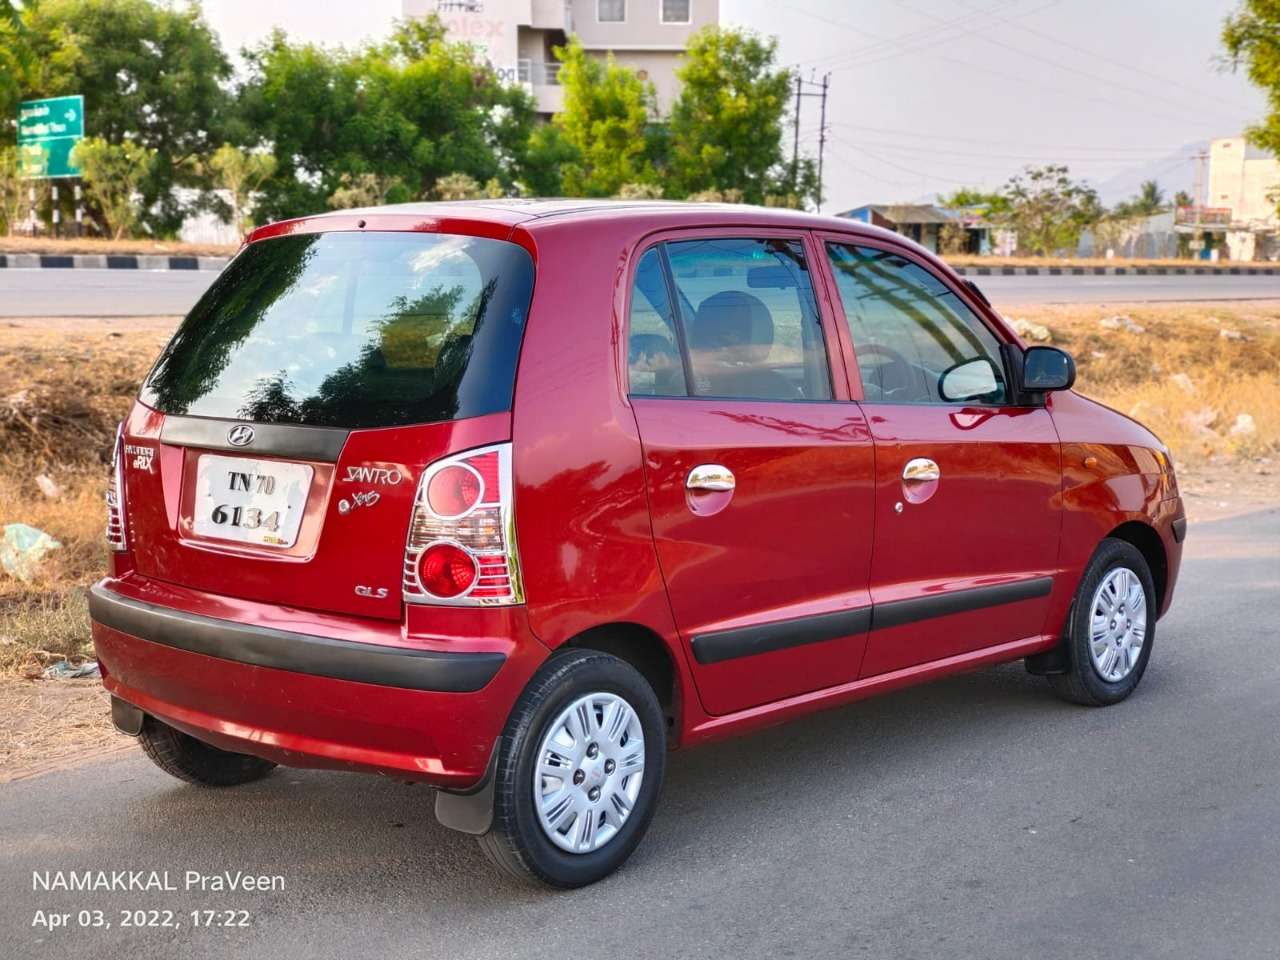 2857-for-sale-Hyundai-Santro-Xing-Diesel-Second-Owner-2019-TN-registered-rs-215000